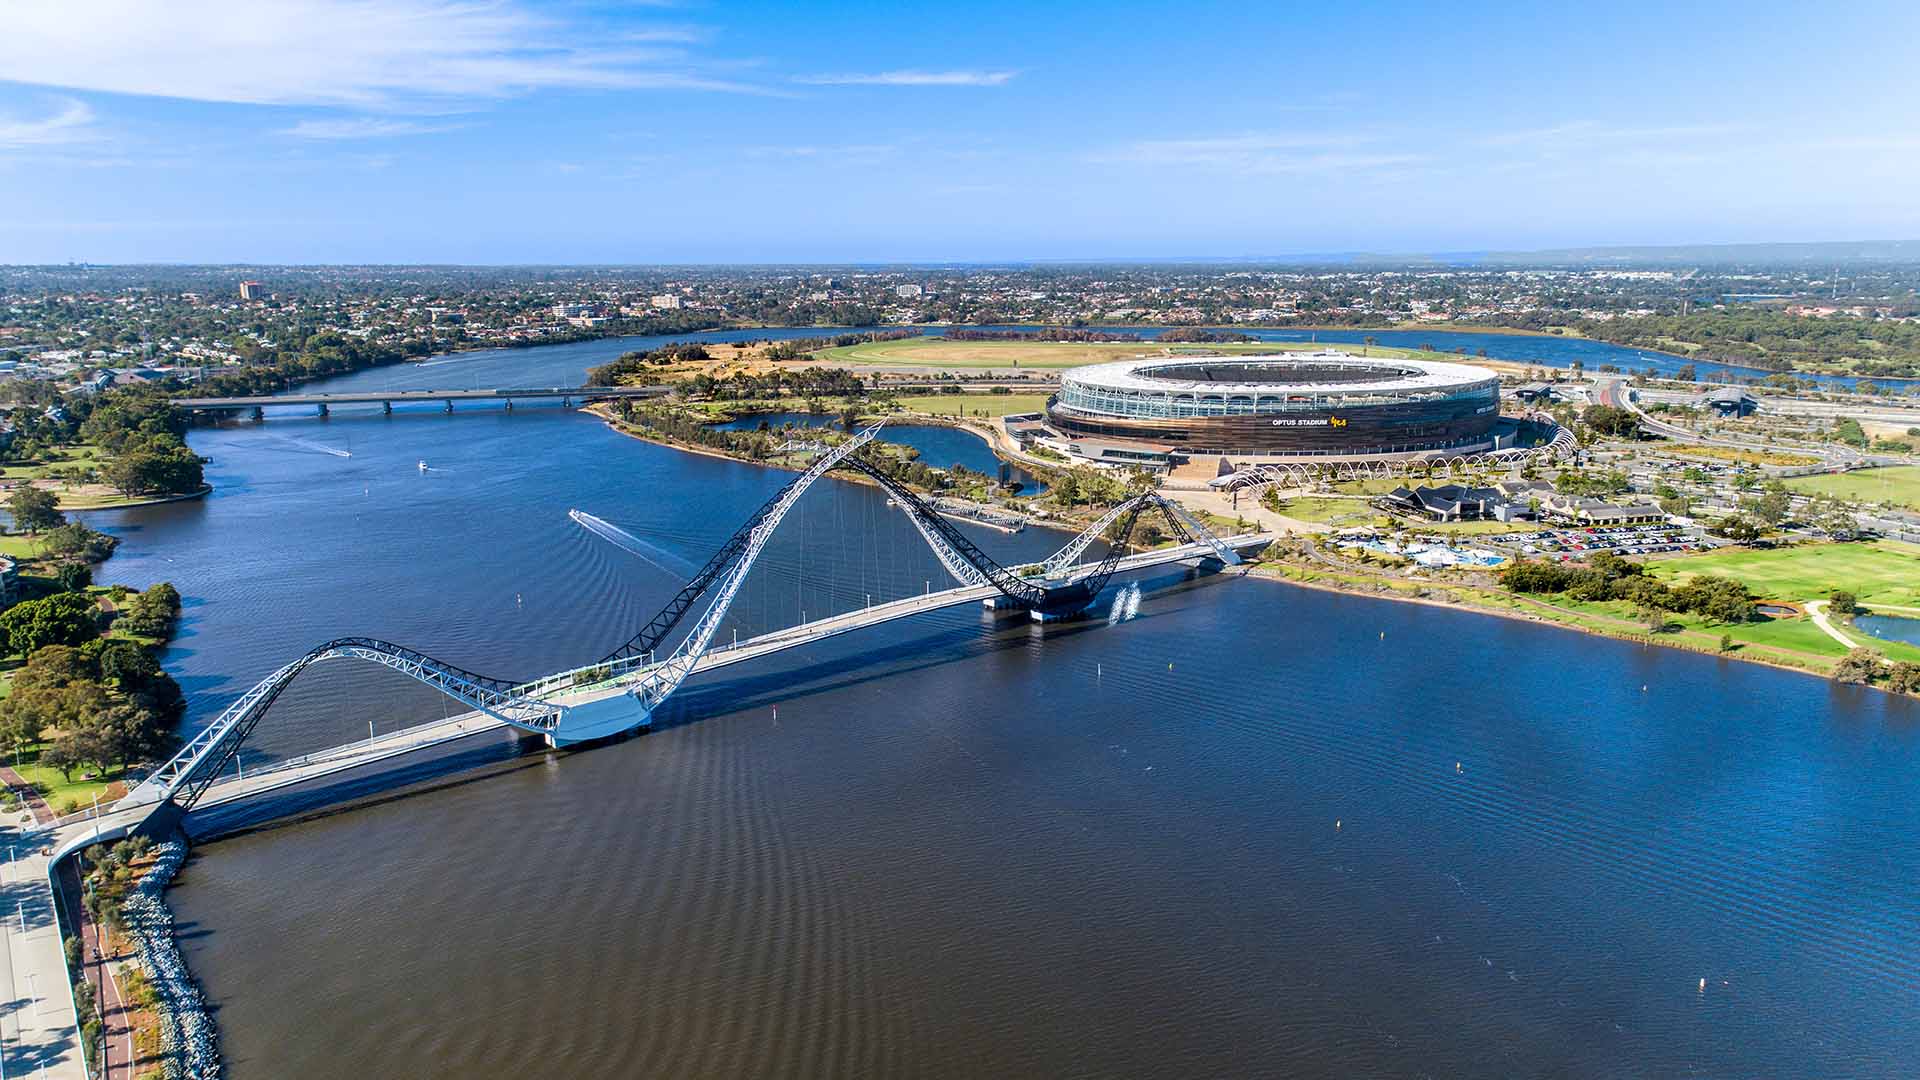 The 2021 AFL Grand Final Is Officially Moving to Perth's Optus Stadium